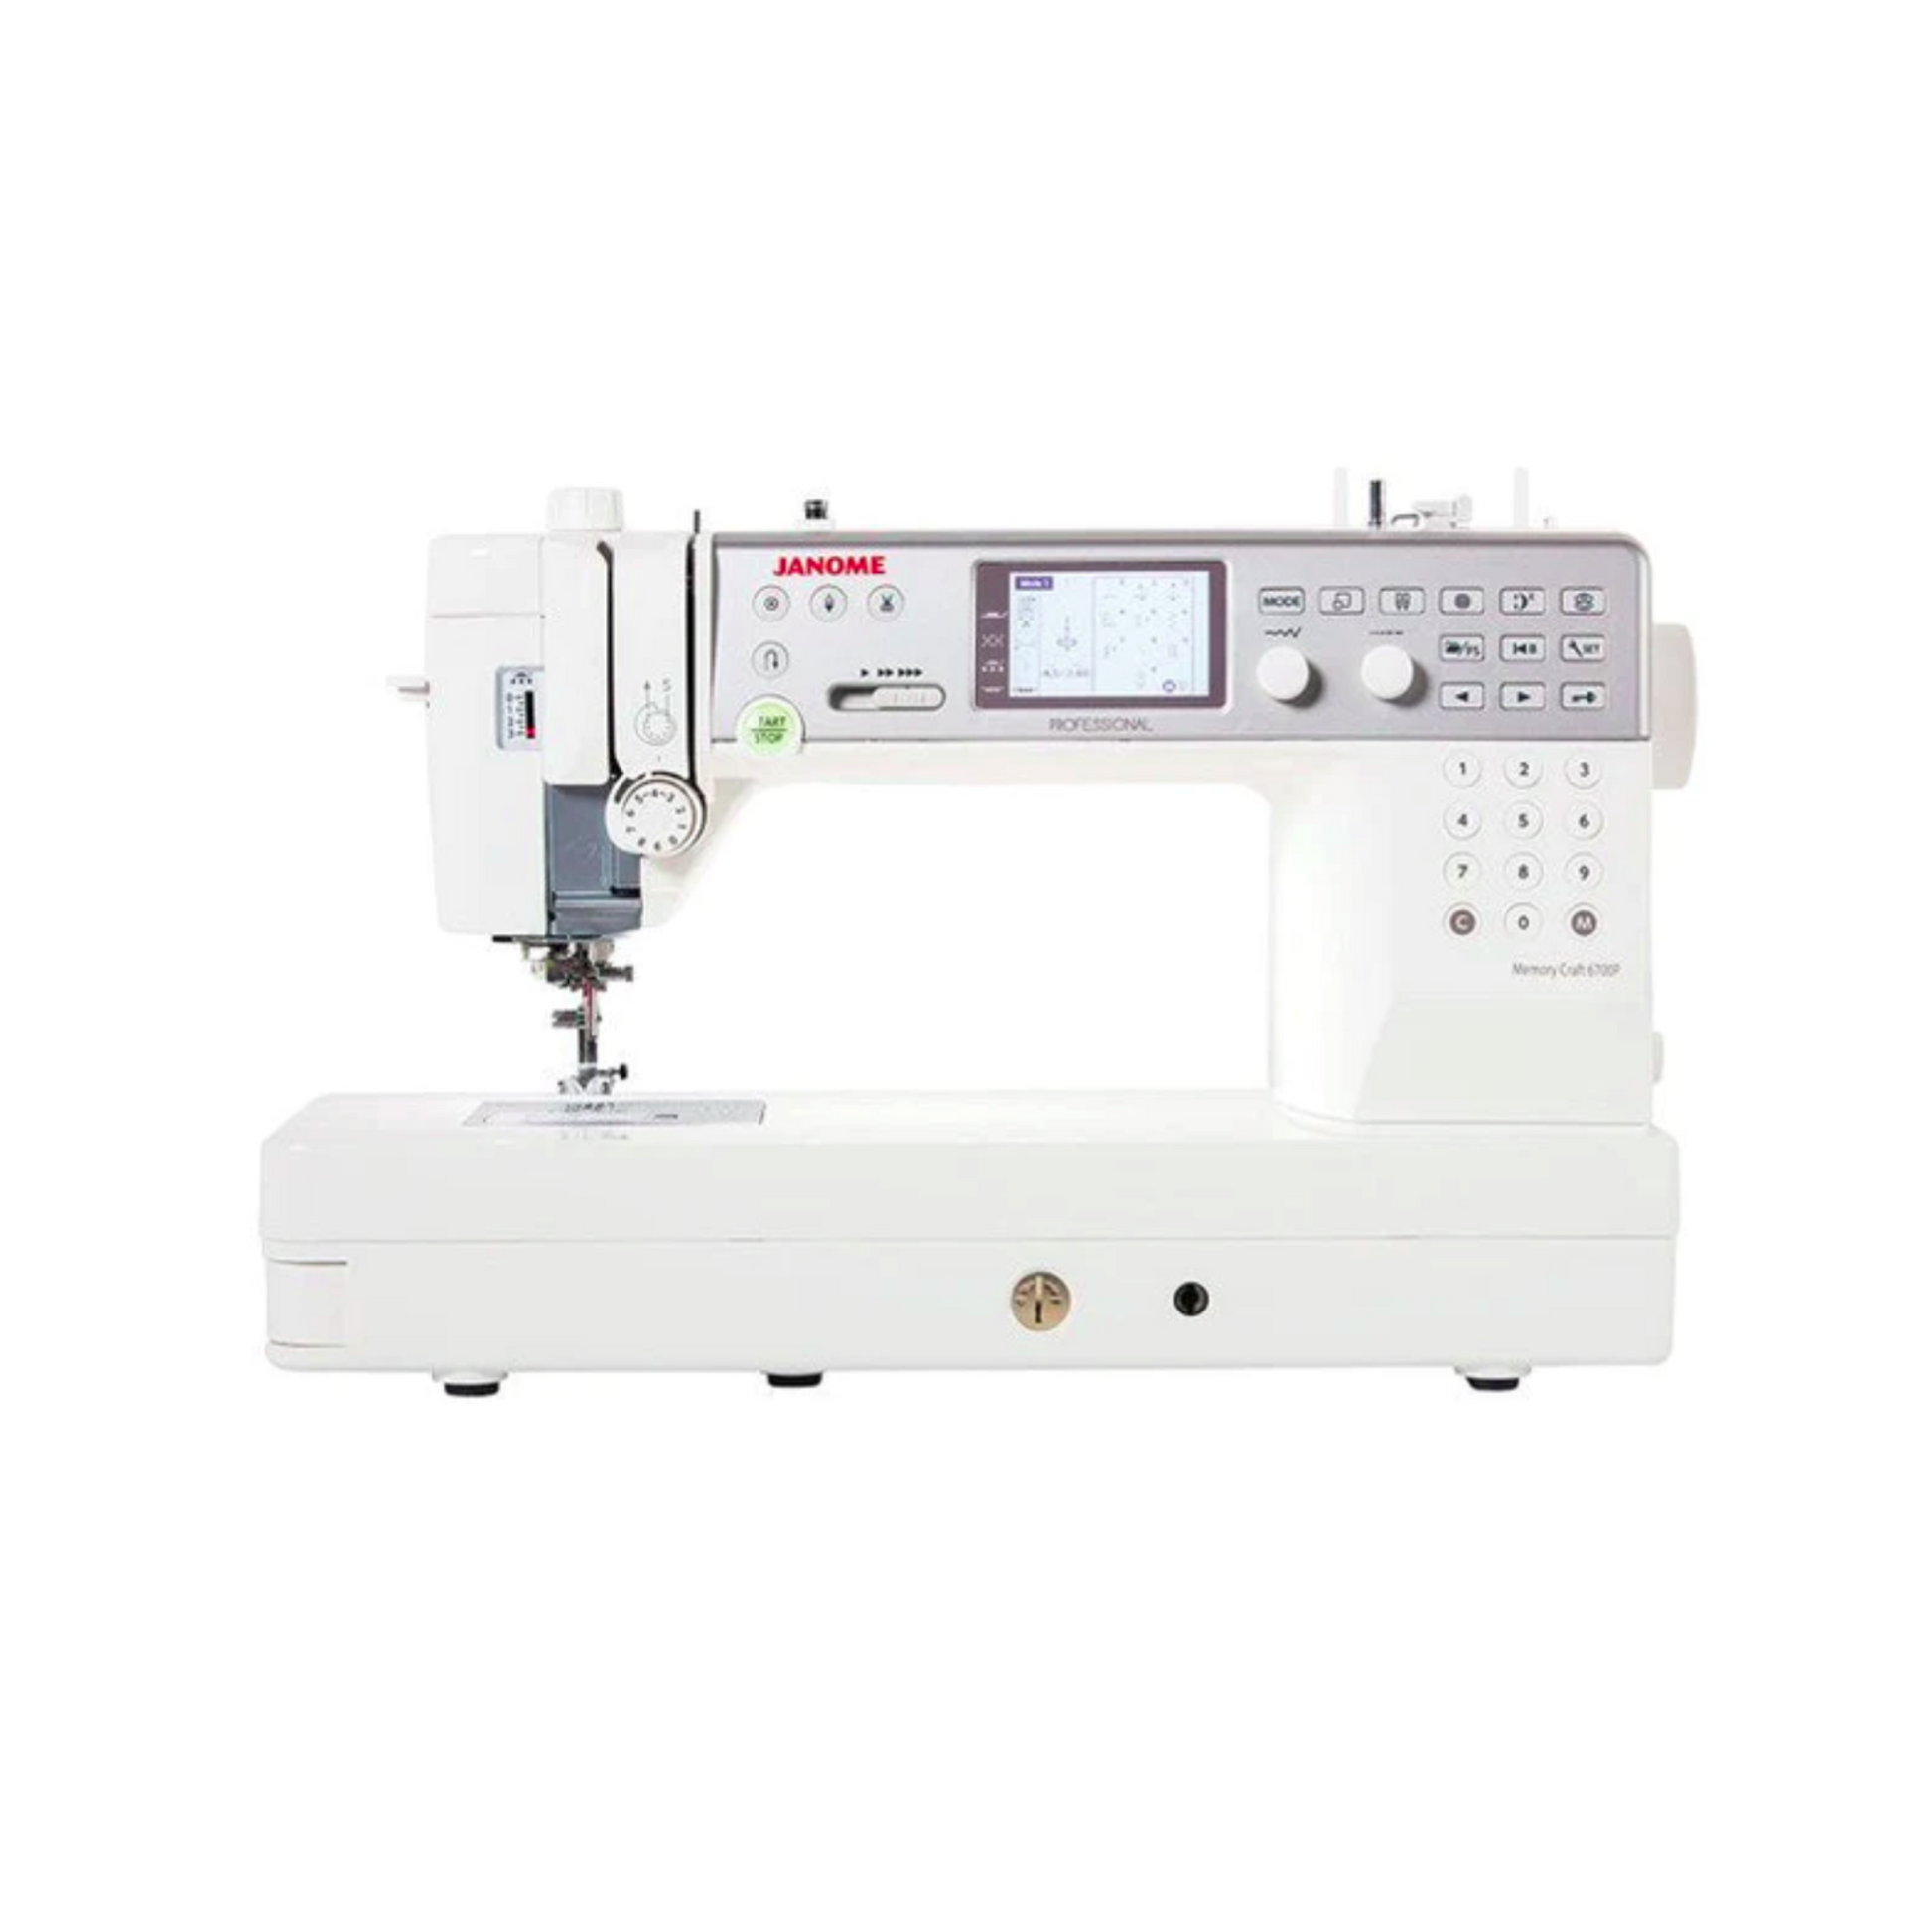 Janome memory craft 6700p - Sewing machine - White - Front view